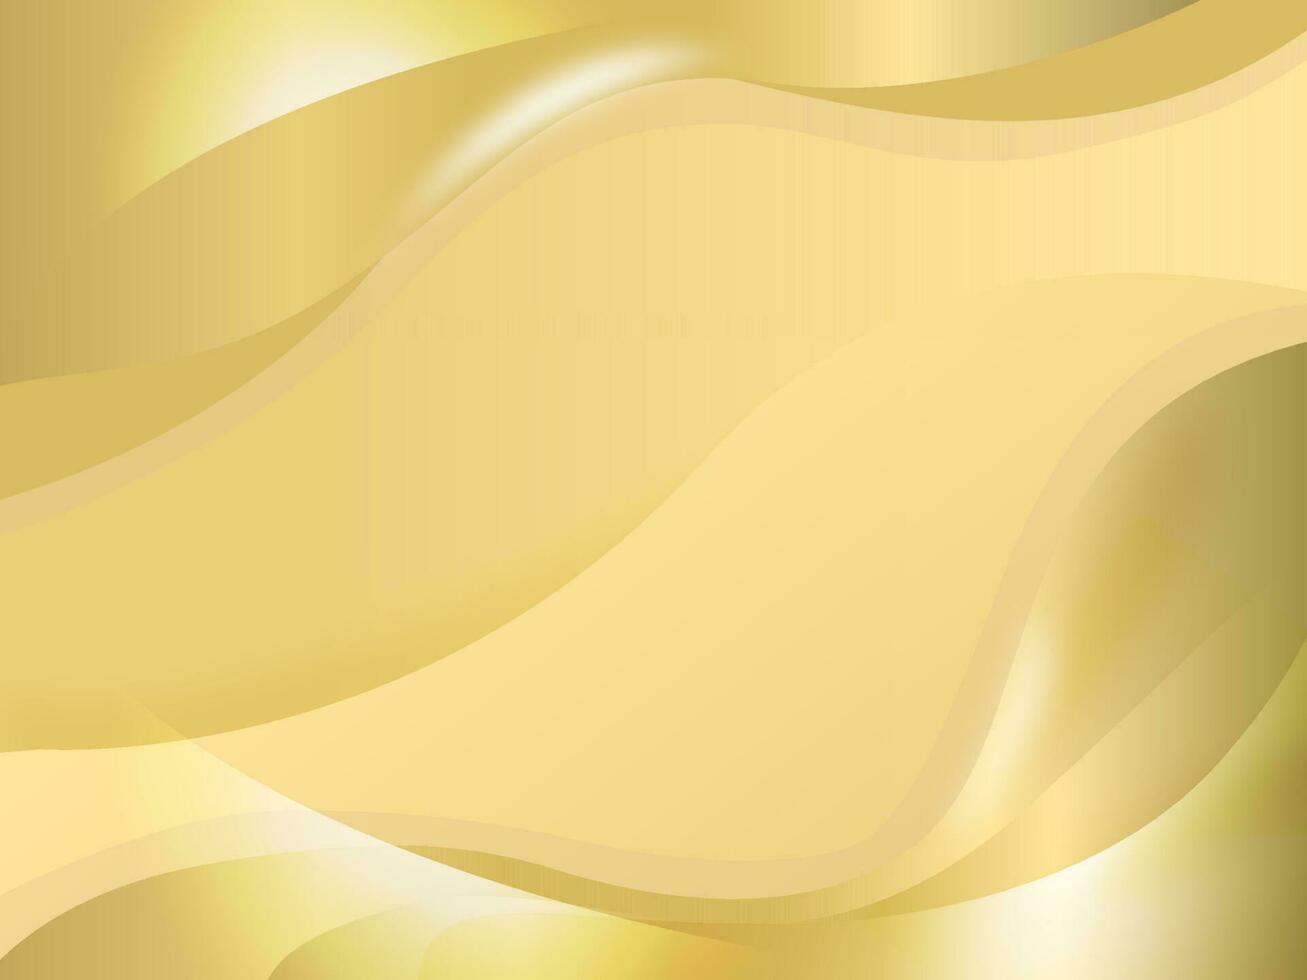 Glossy Abstract Golden Background With Waves. vector